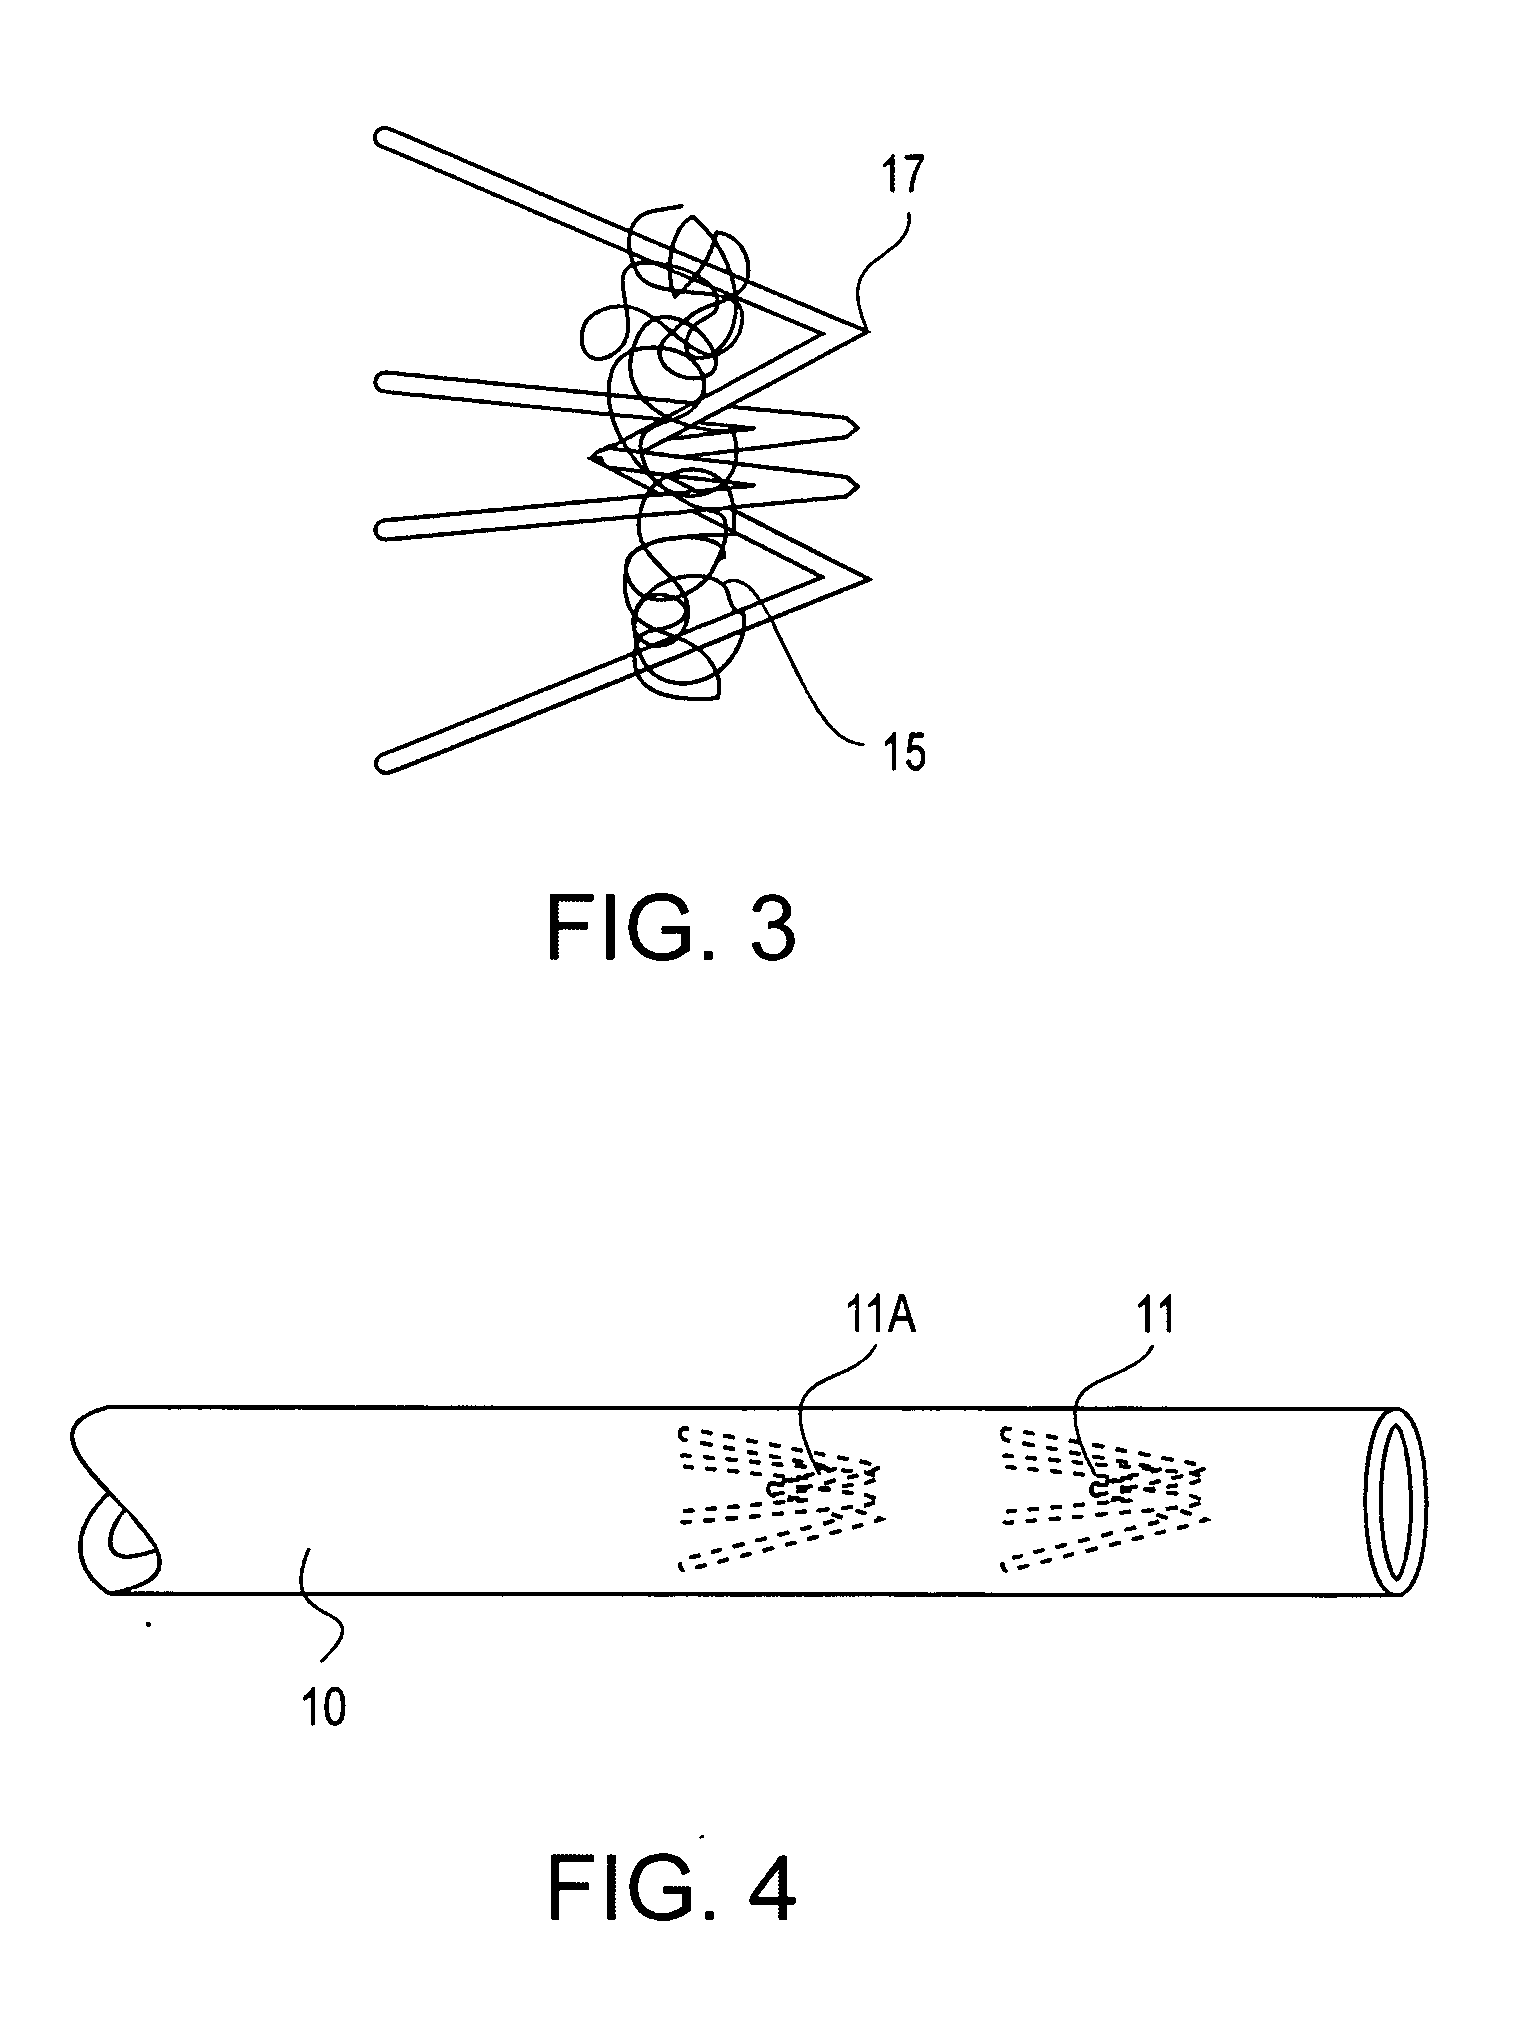 Methods and devices for occluding body lumens and/or enhancing tissue ingrowth